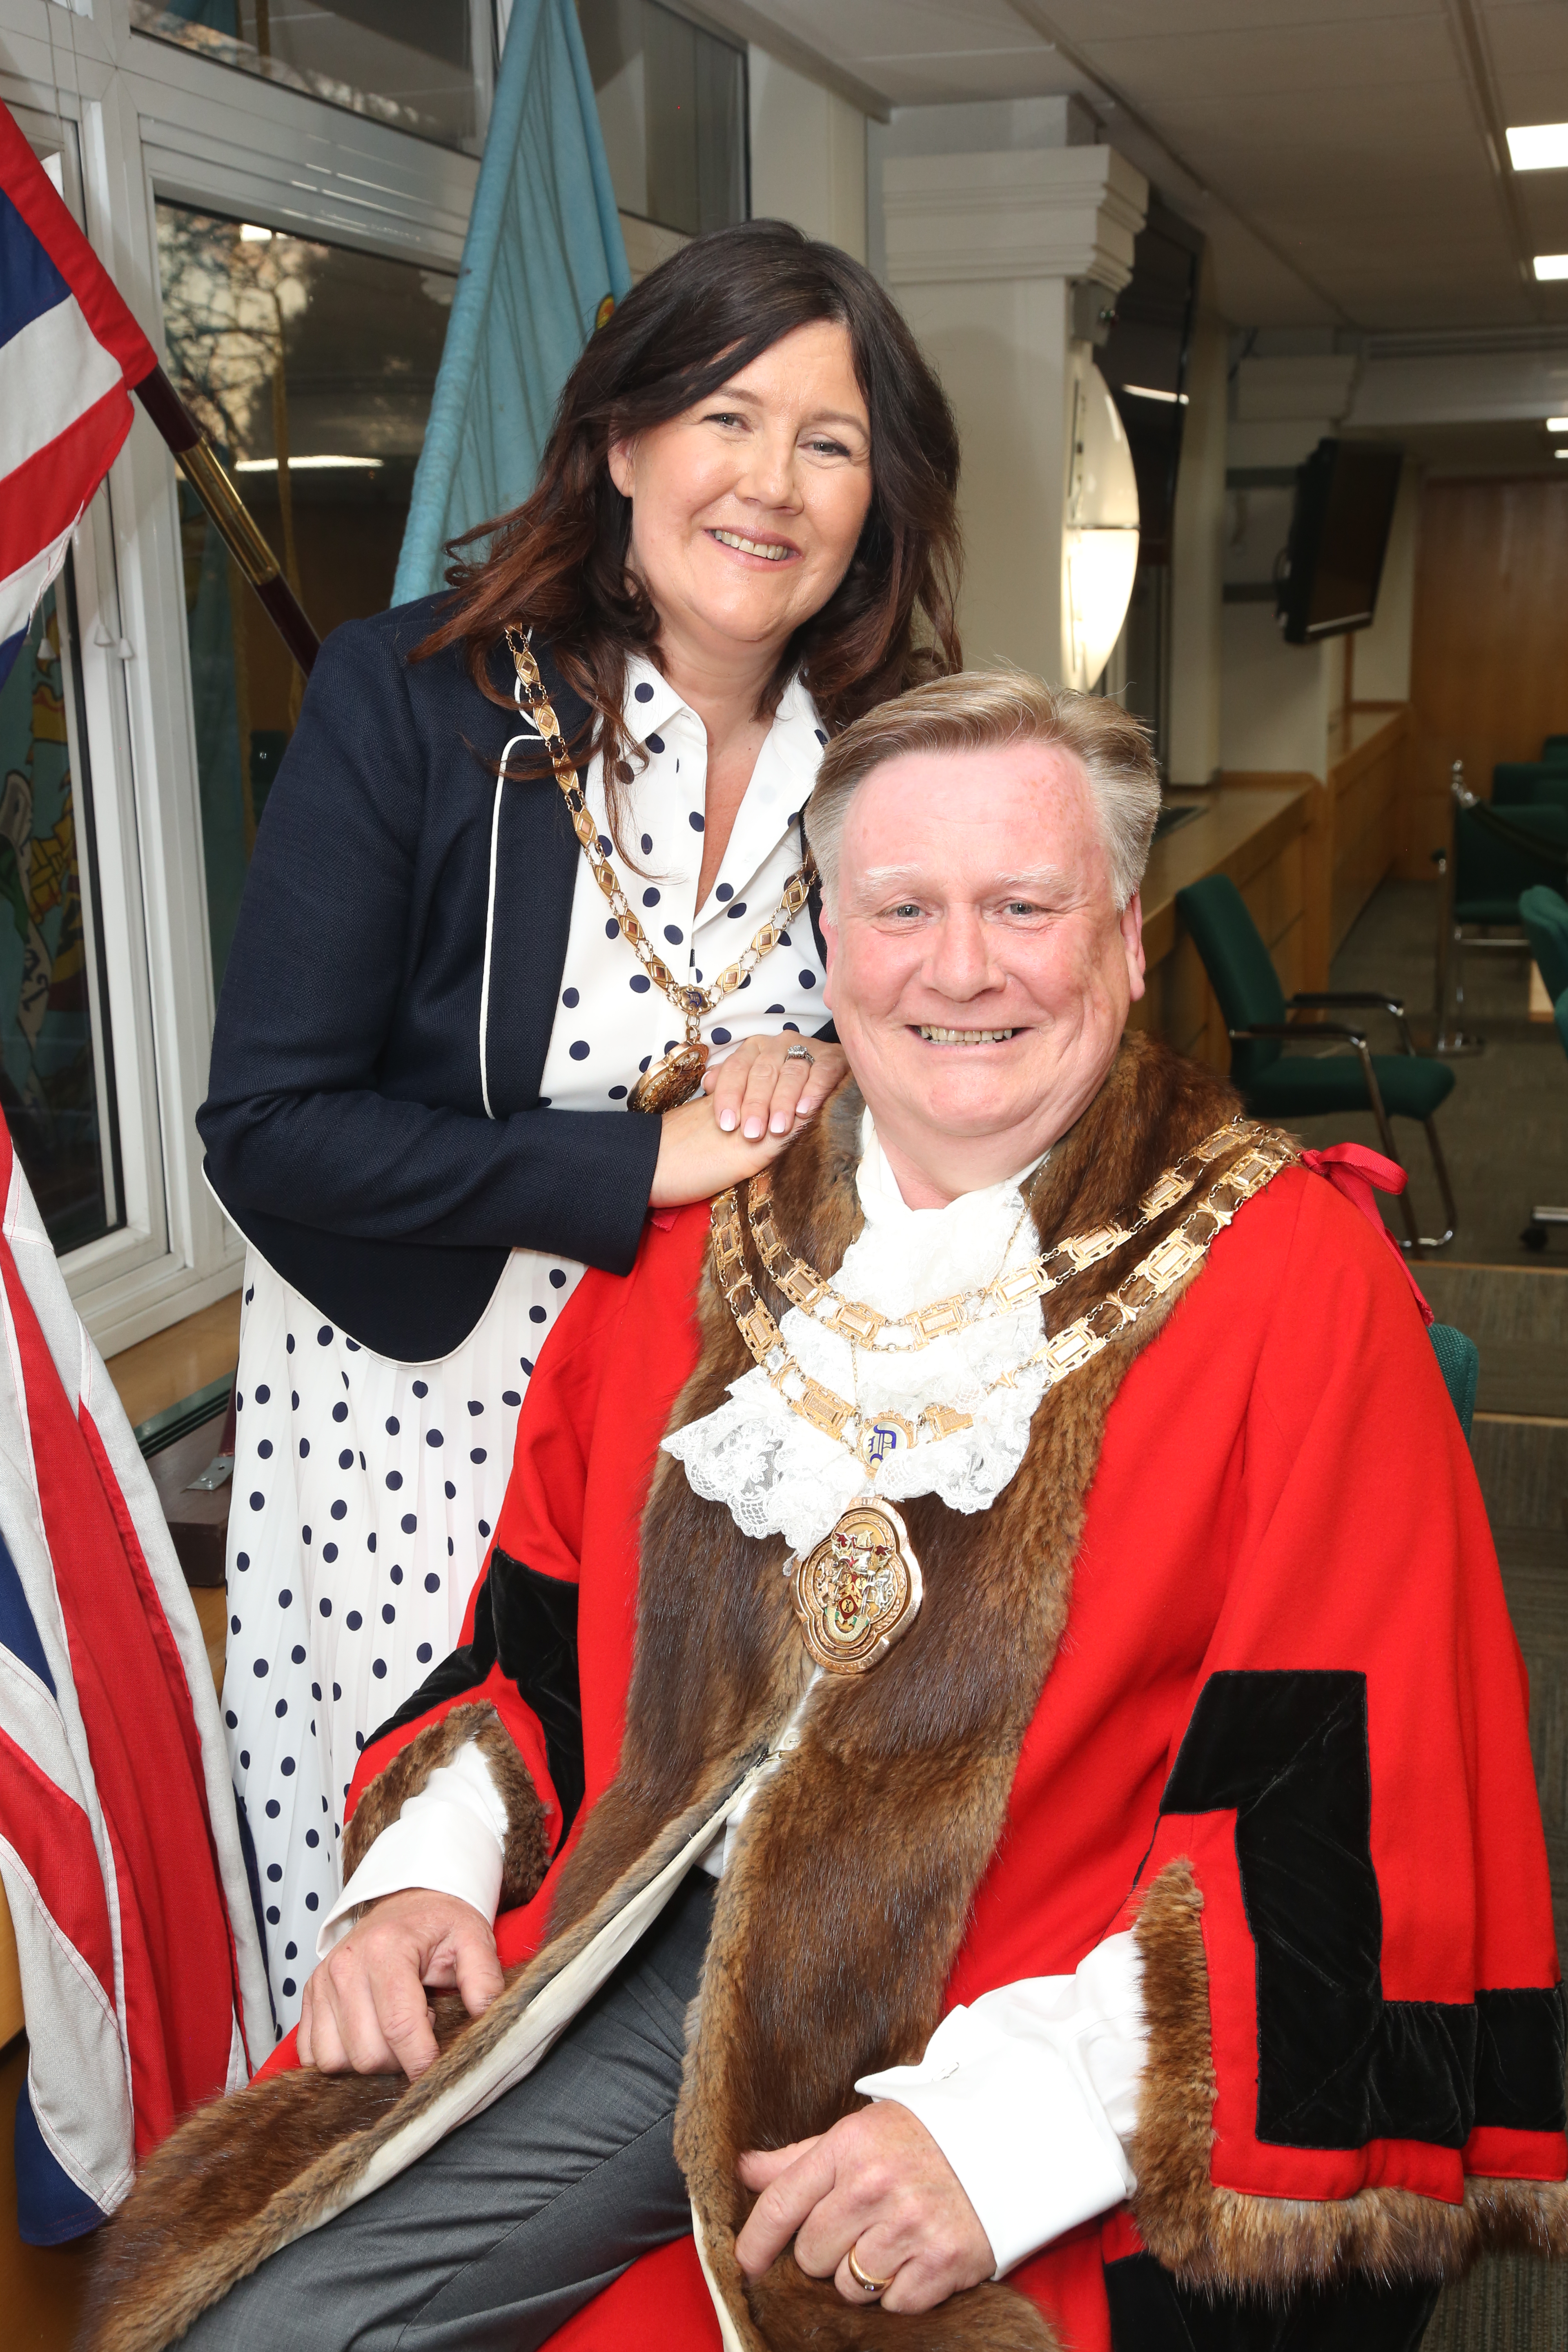 Cllr Paul Cutler was elected the new Mayor of Dartford for 2022/23.